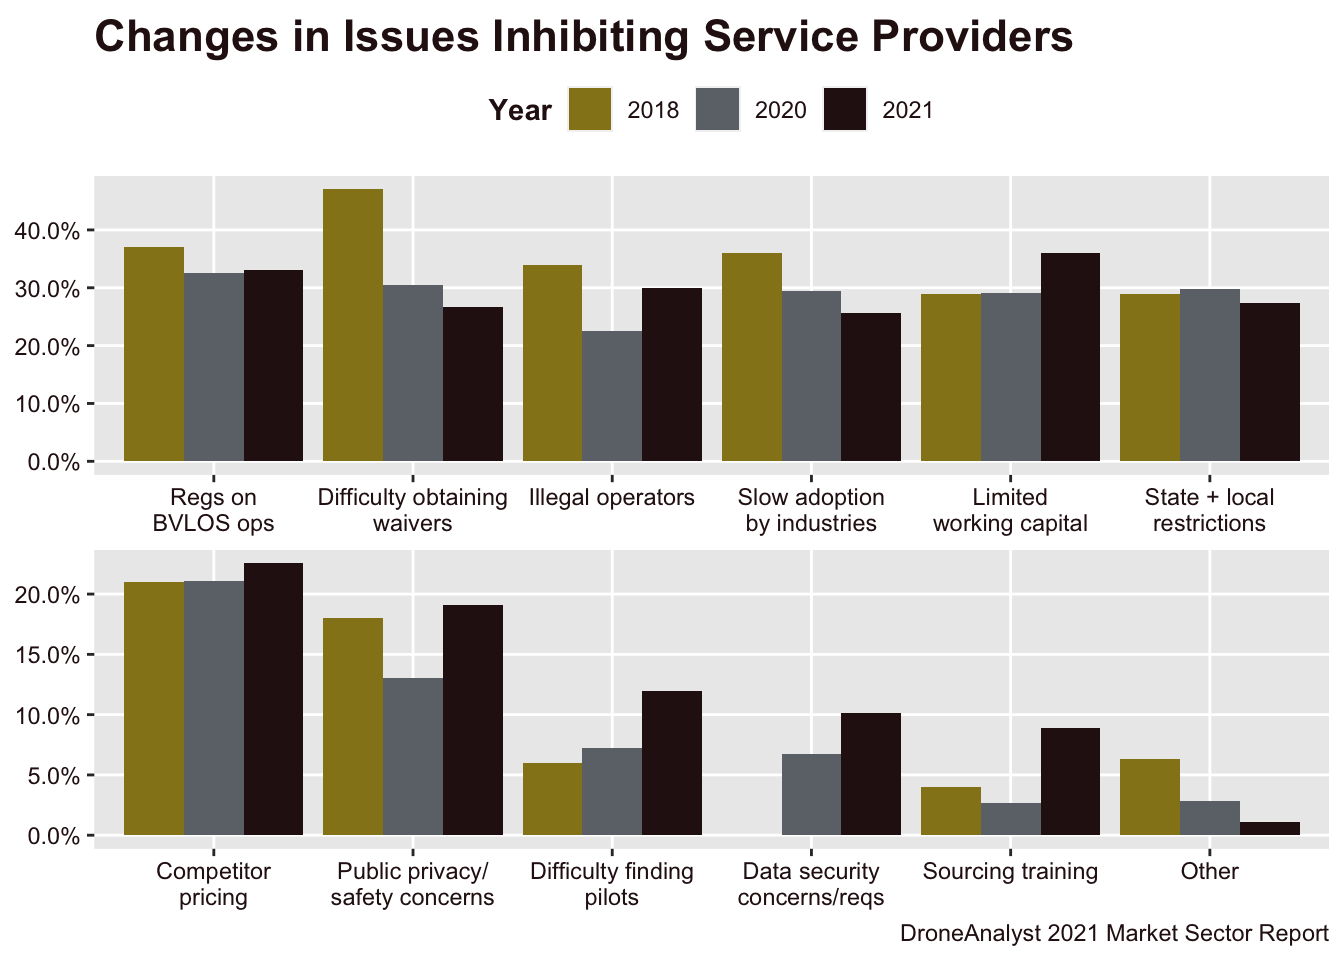 Changes in Issues Inhibiting Service Providers